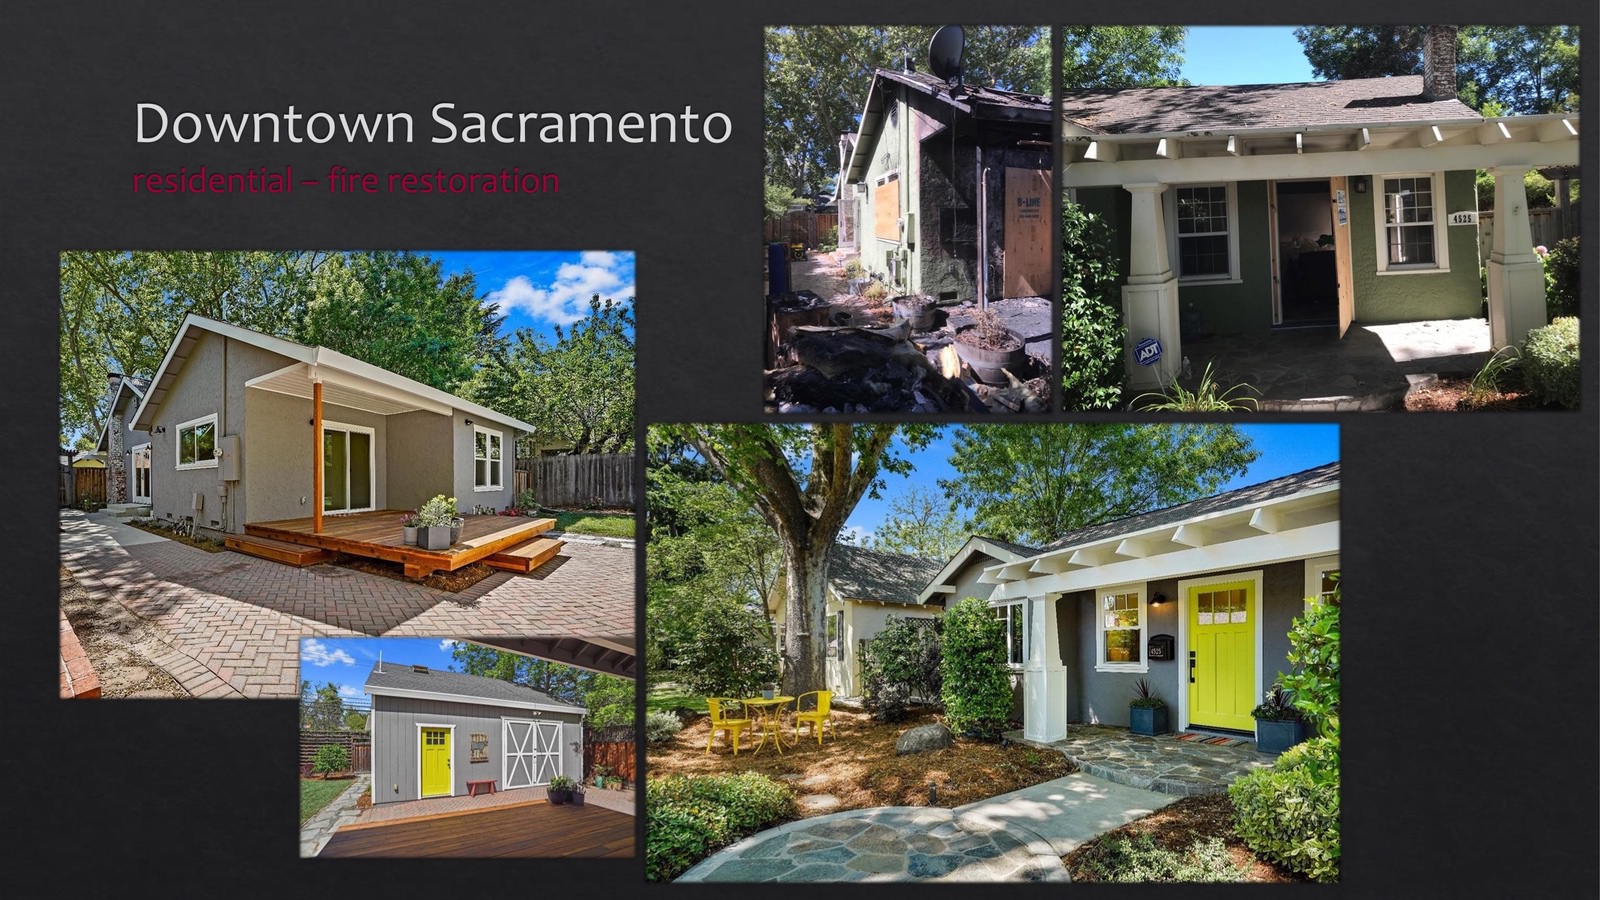 Downtown Sacramento Residential fire restoration - front and side of house - lightbox